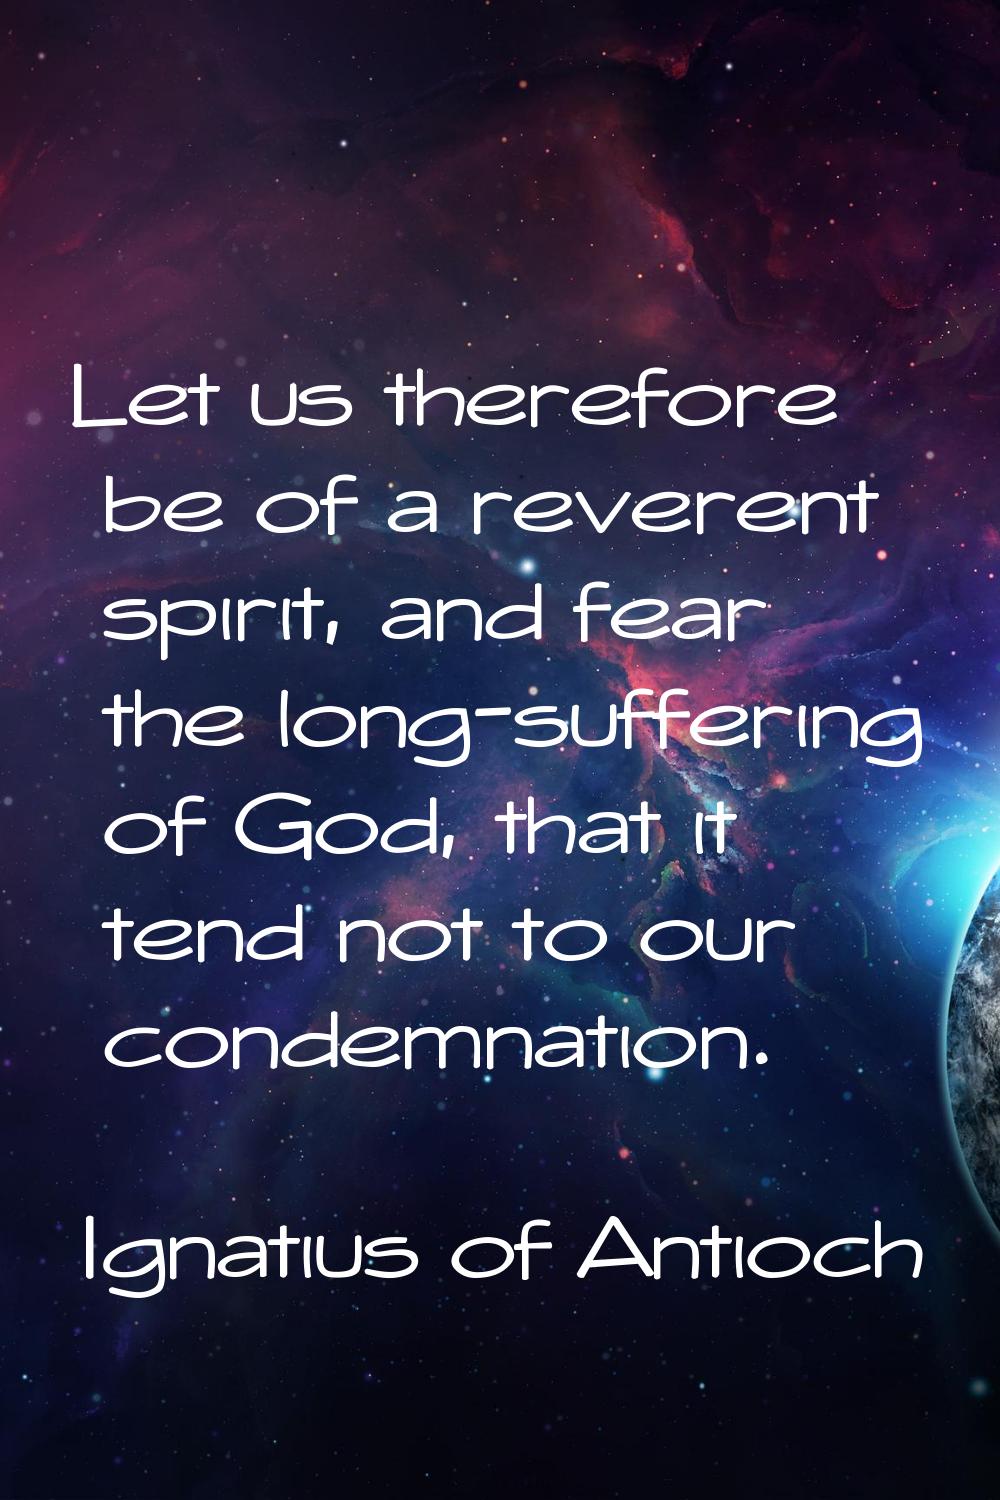 Let us therefore be of a reverent spirit, and fear the long-suffering of God, that it tend not to o